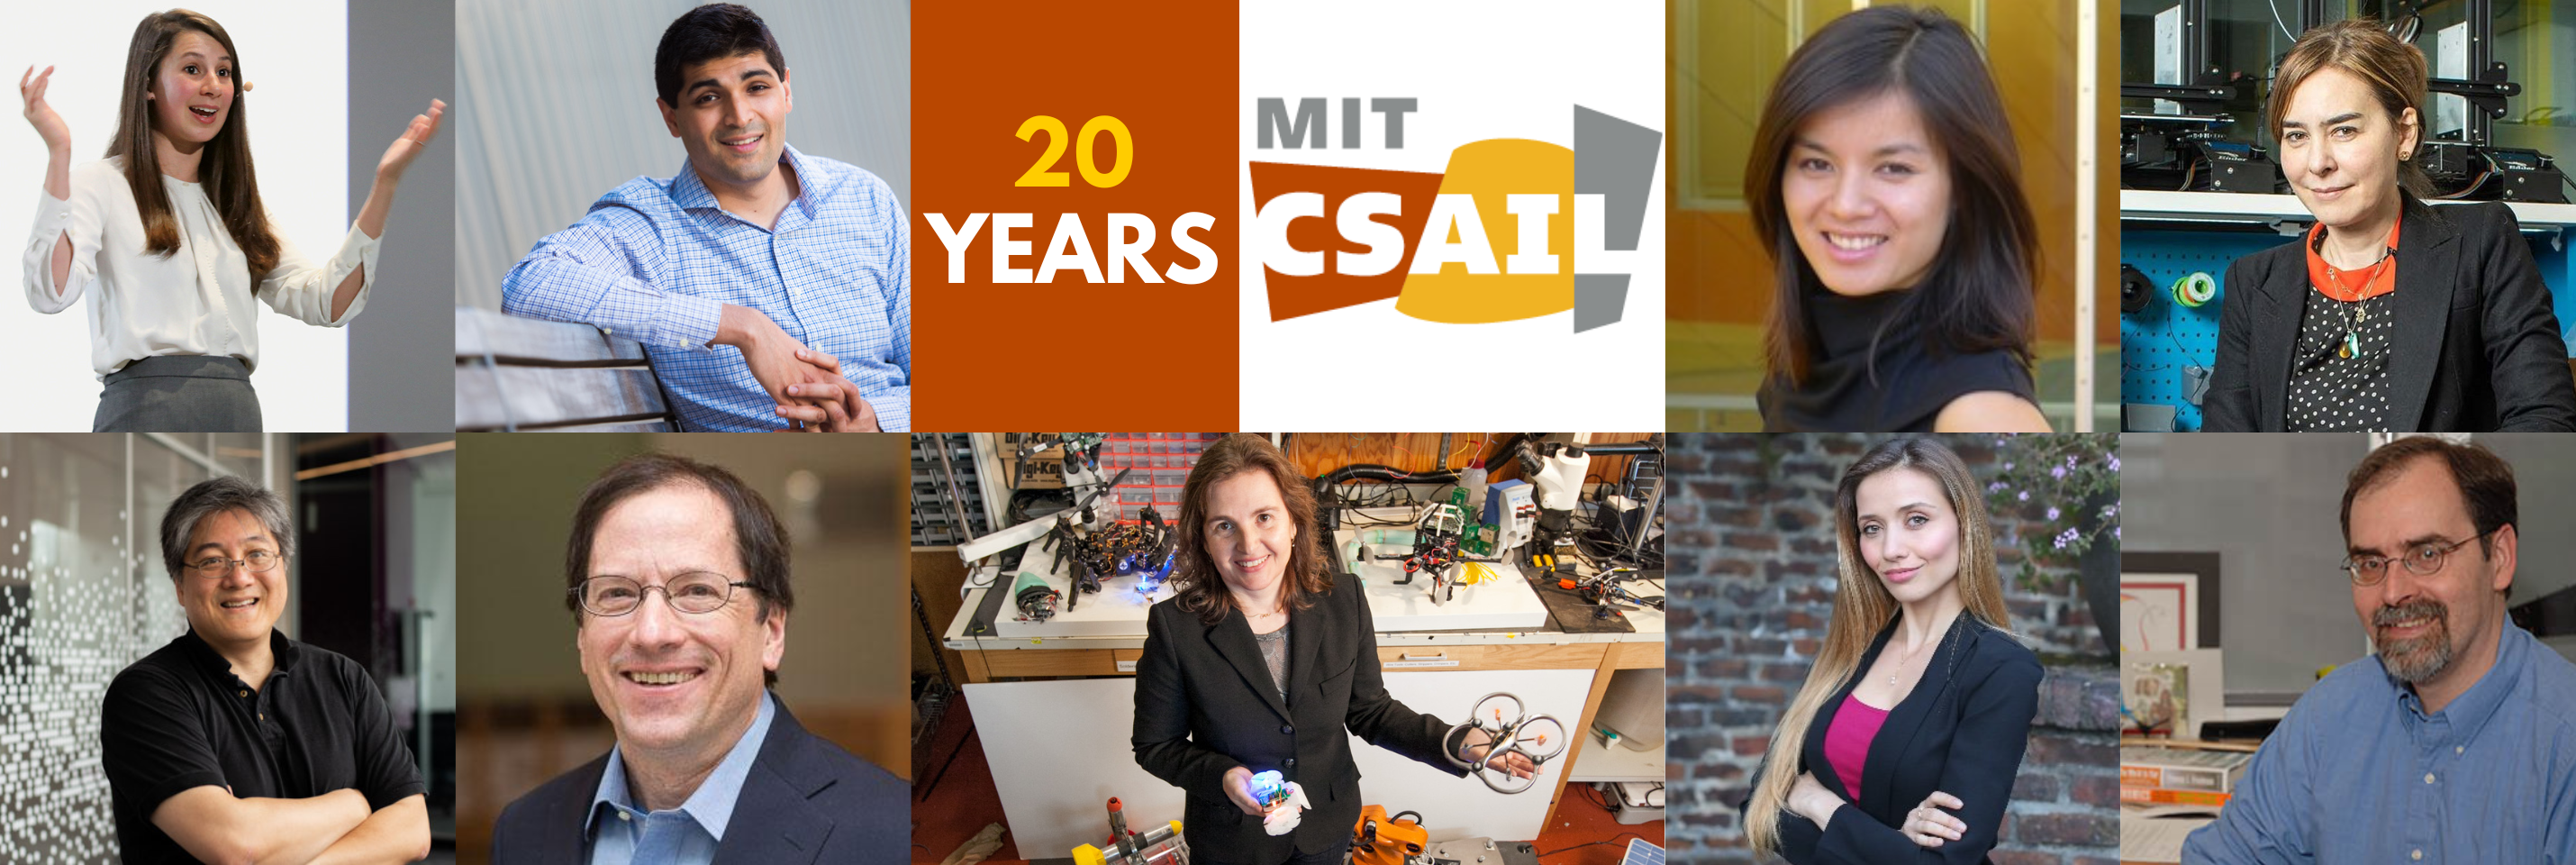 Two rows of five images - first row, Head and shoulders shot of Katie Bouman with her Arms up, Head and shoulders shot of Ankur Moirta, orange rectangle with text "20 years" next to csail logo on white background, headhot of Jean Yang, head and shoulders shot of Dina Katabi, bottom - Head and shoulders shot of David Bau, Head shot of Bill Freeman, Daniela Rus standing in lab with robots and drones, Head and shoulders of Raluca-Ada Popa, head and shoulders of Tomas Lozano-Perez 